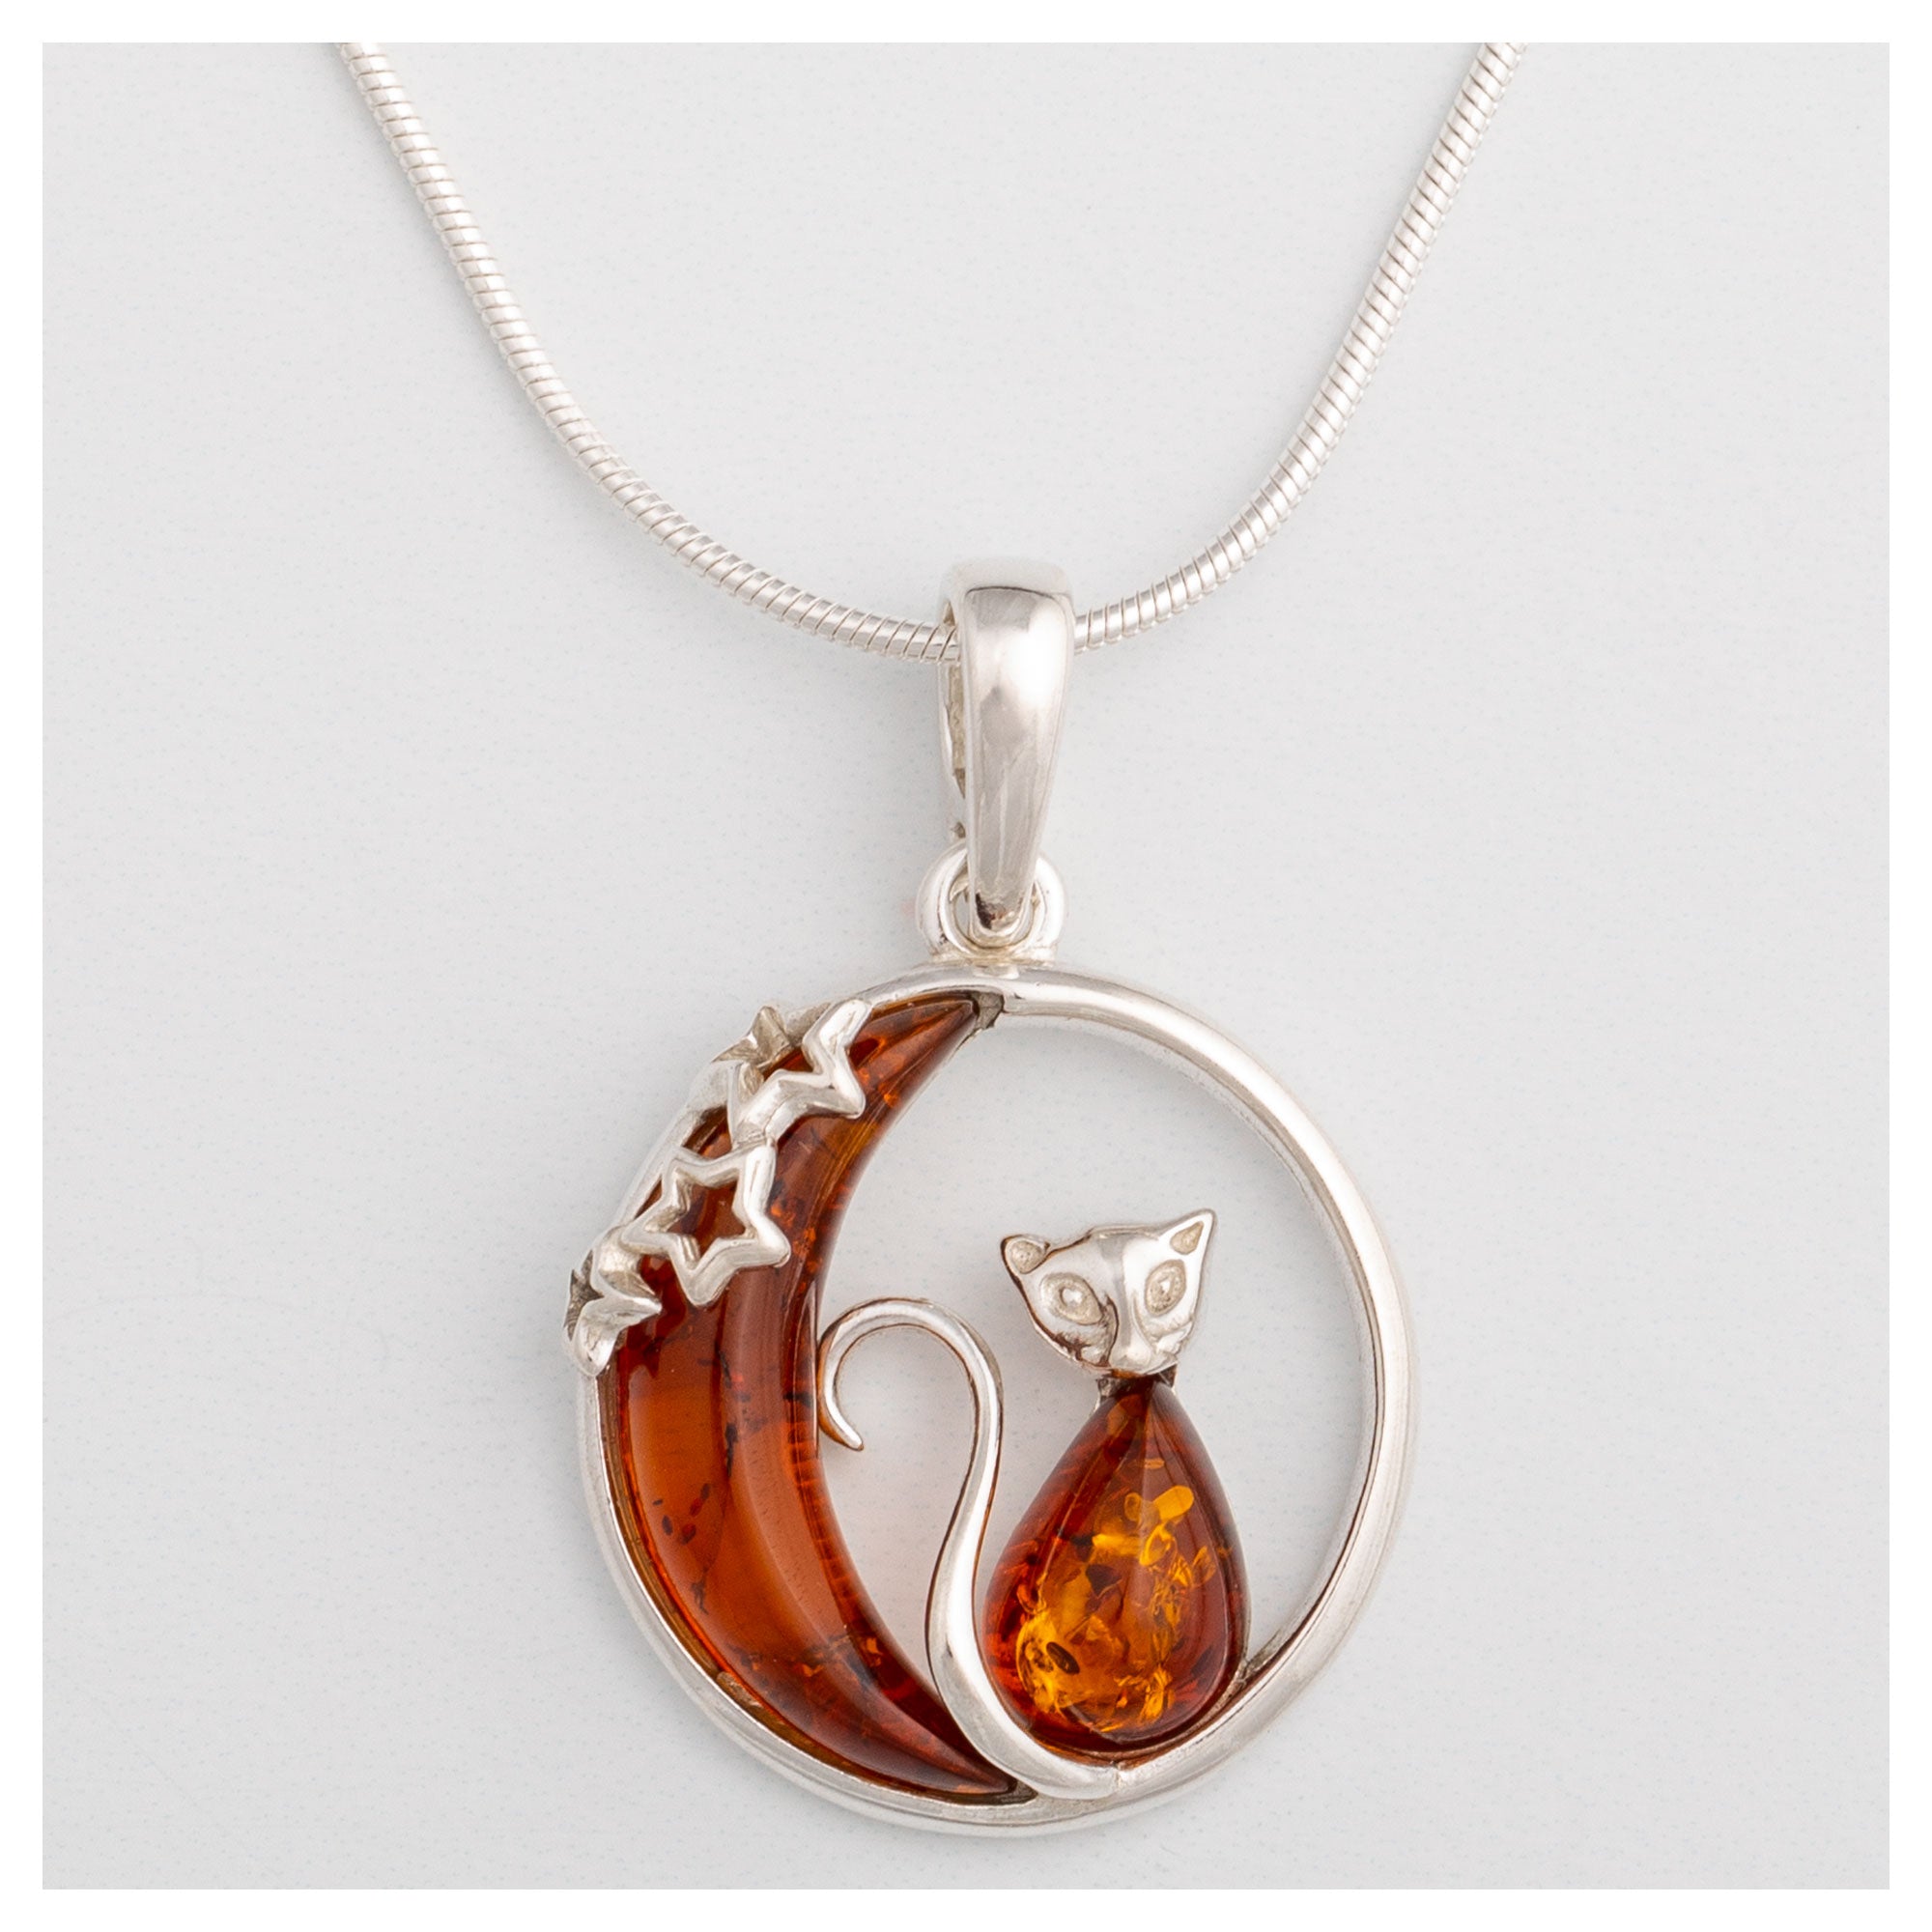 Moonlight Cat Sterling & Amber Necklace - Cognac - Pendant Only